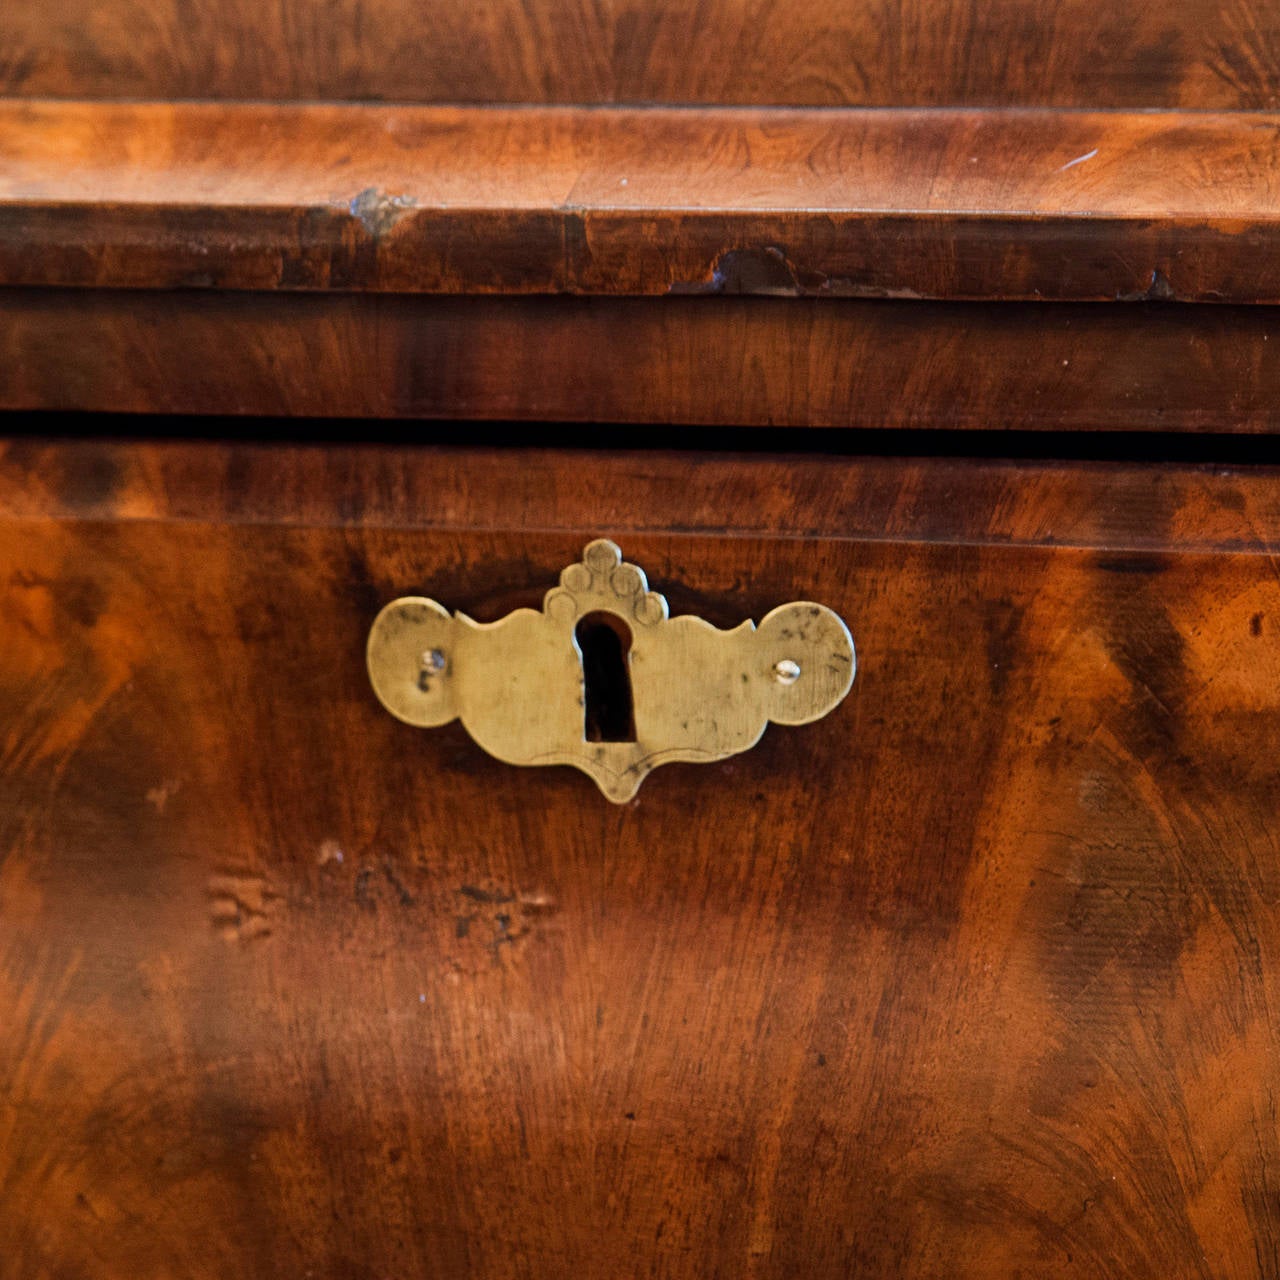 19th Century Biedermeier Mahogany Chest of Drawers For Sale